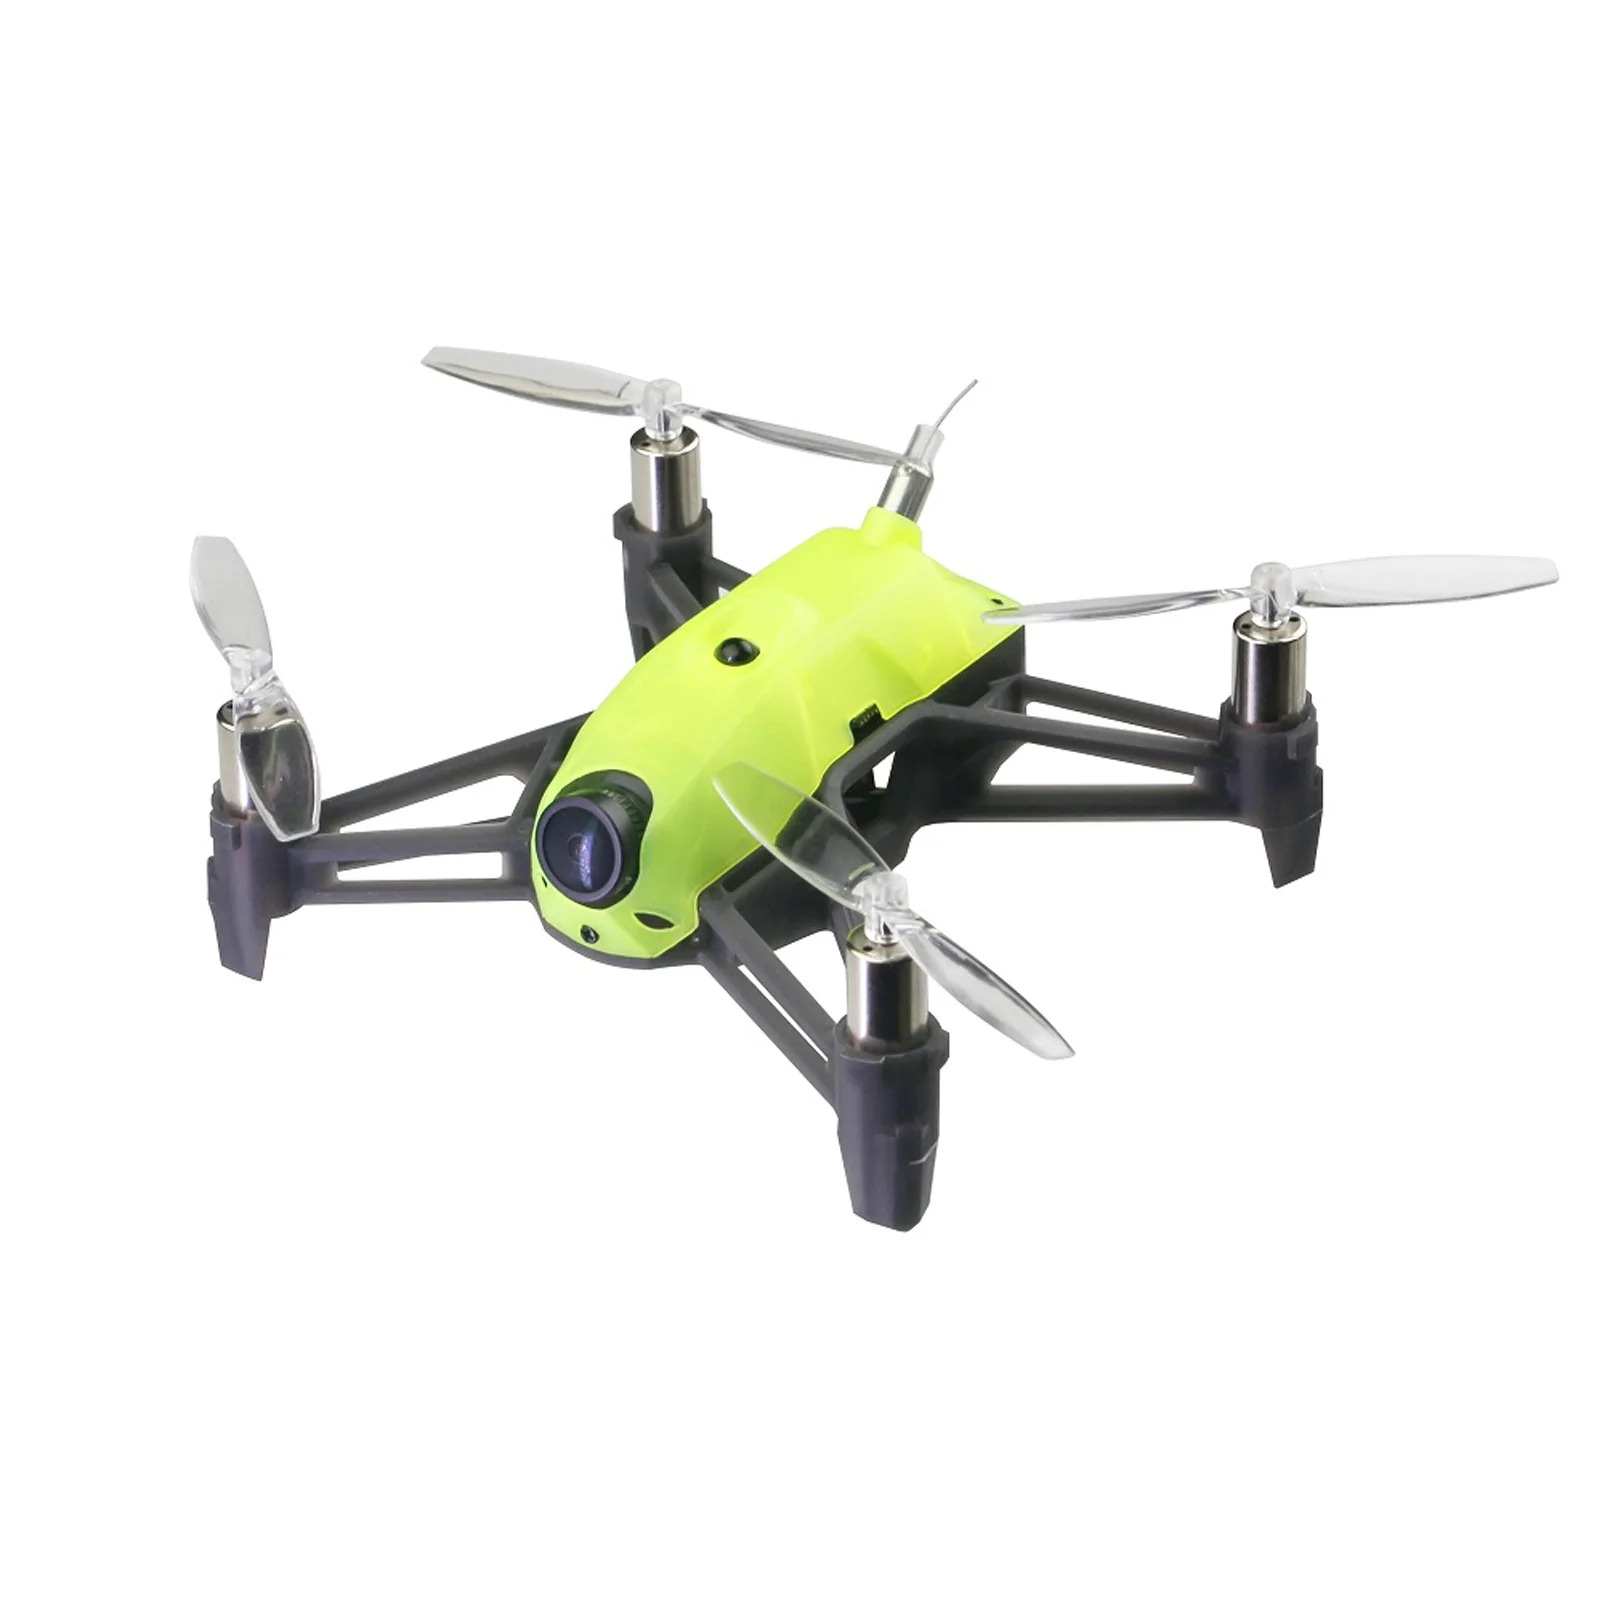 LDARC T11 Racing Drone with Transmitter and Case